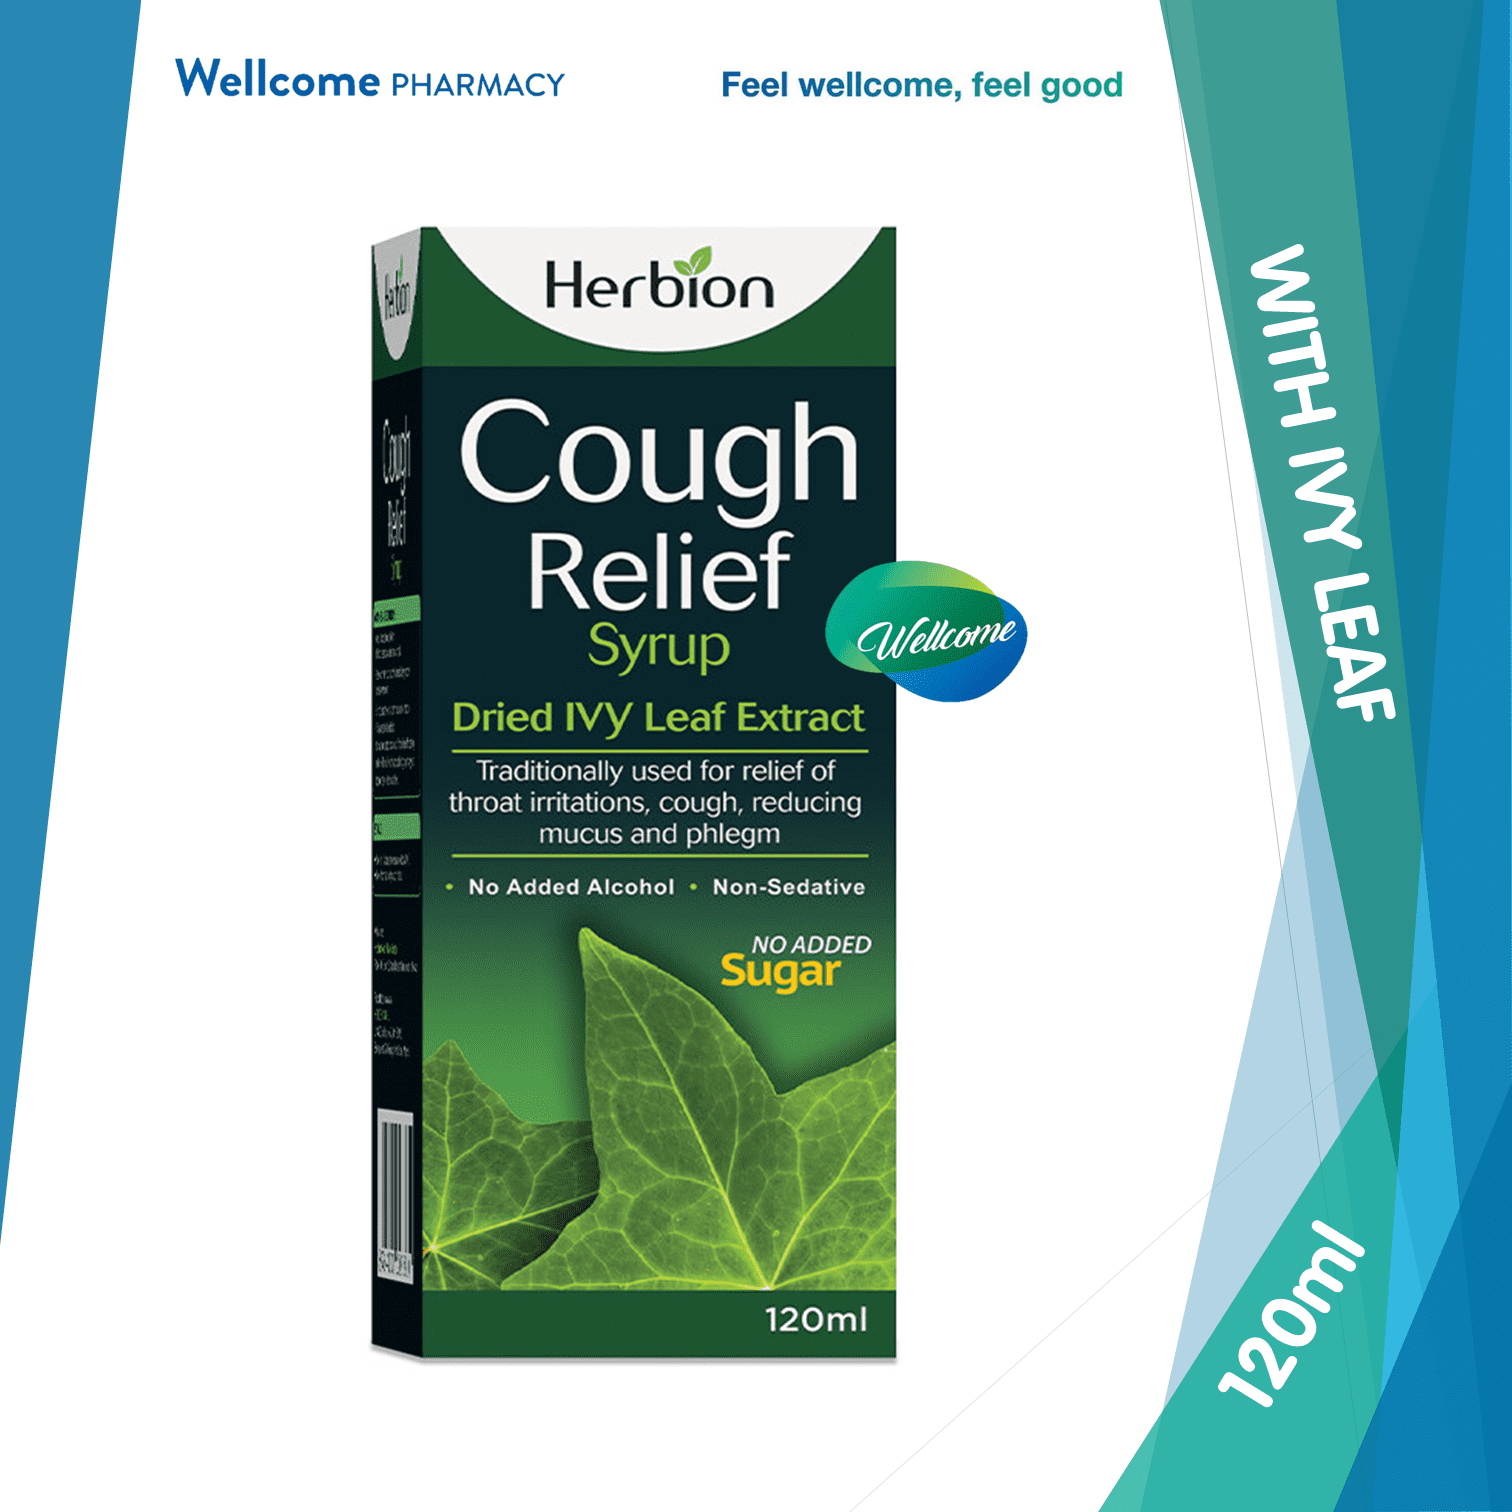 Herbion Cough Relief Syrup - 120ml